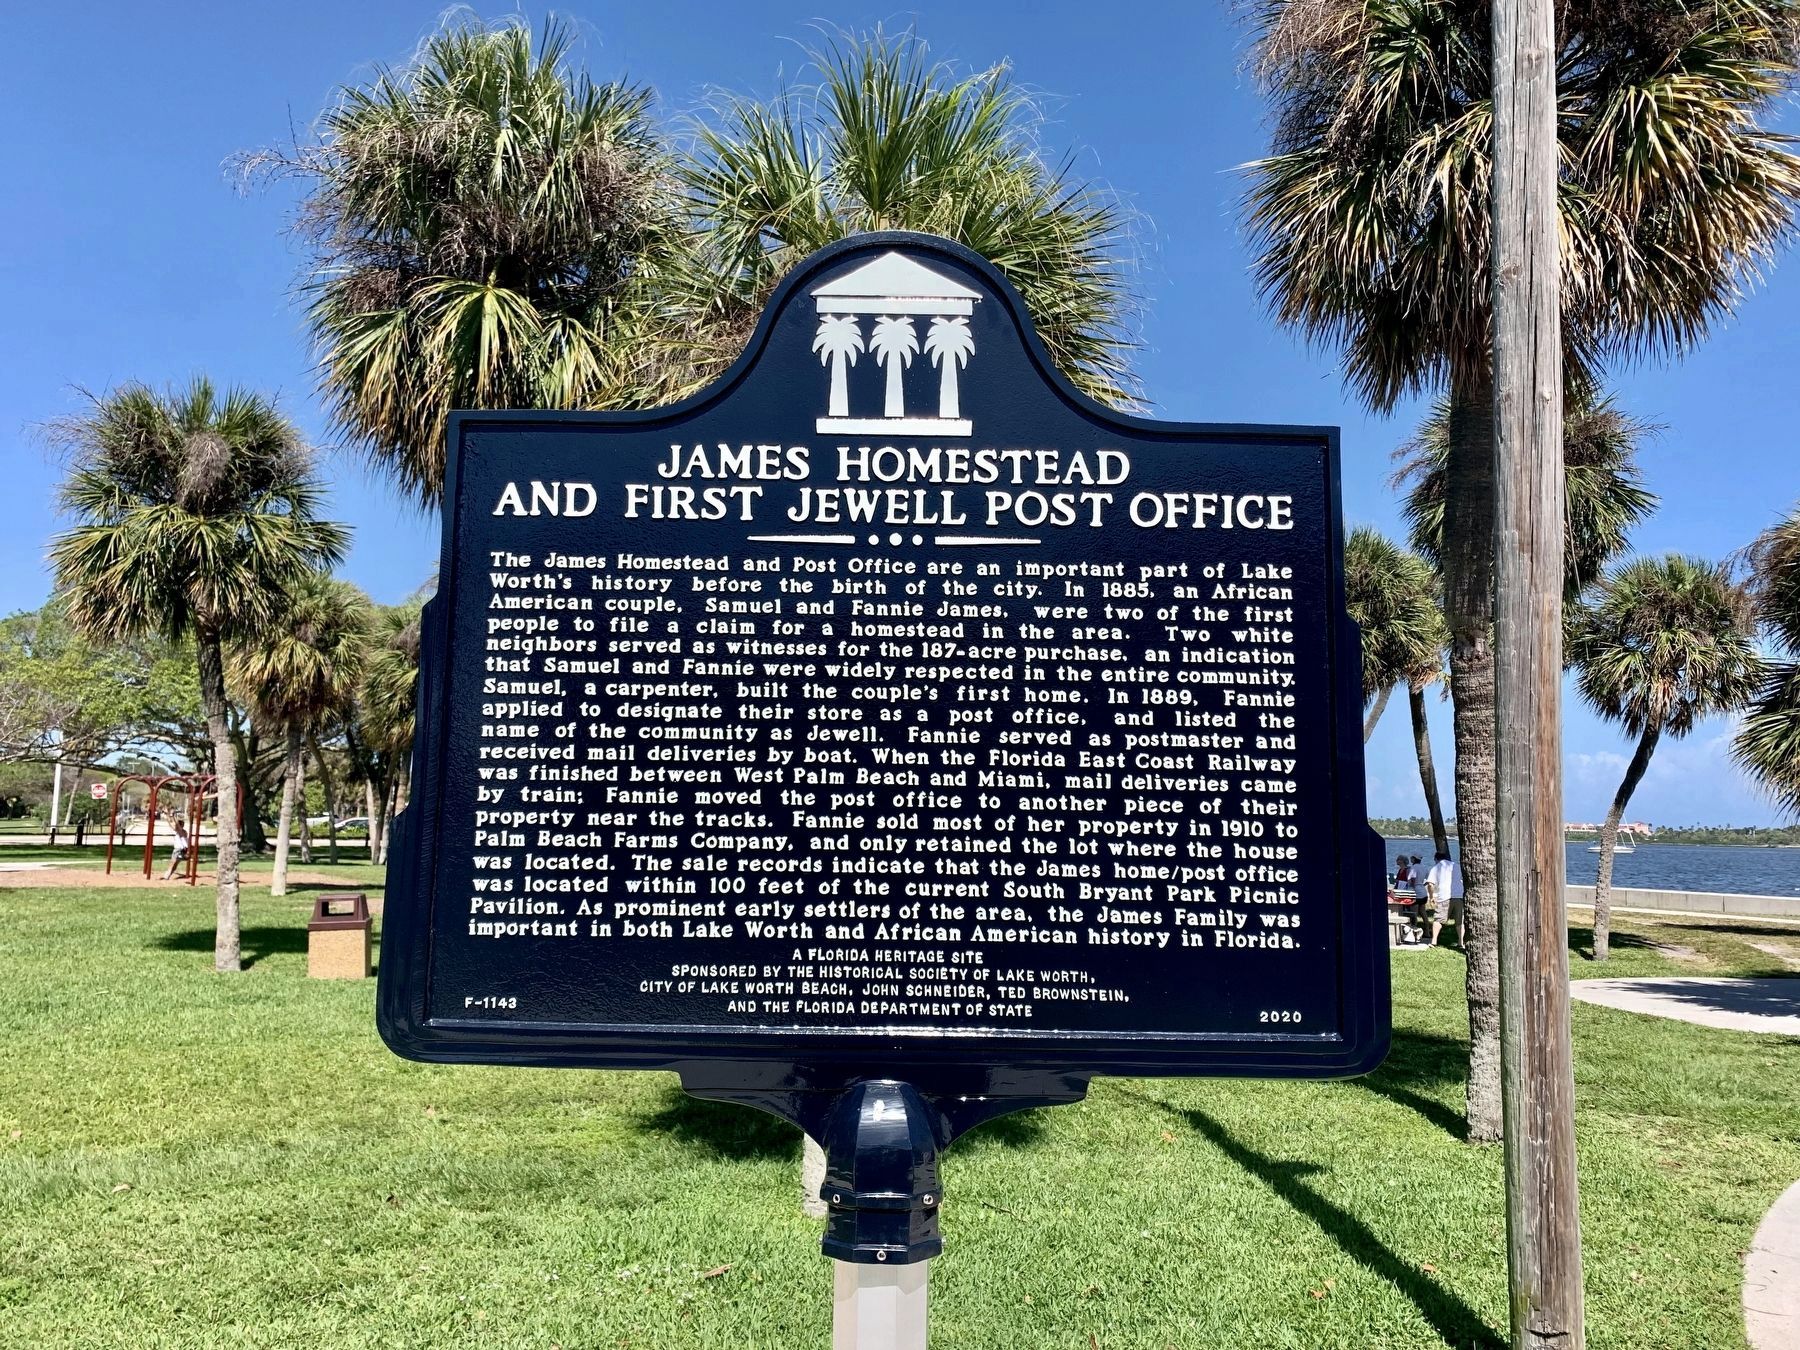 James Homestead and First Jewell Post Office Marker image. Click for full size.